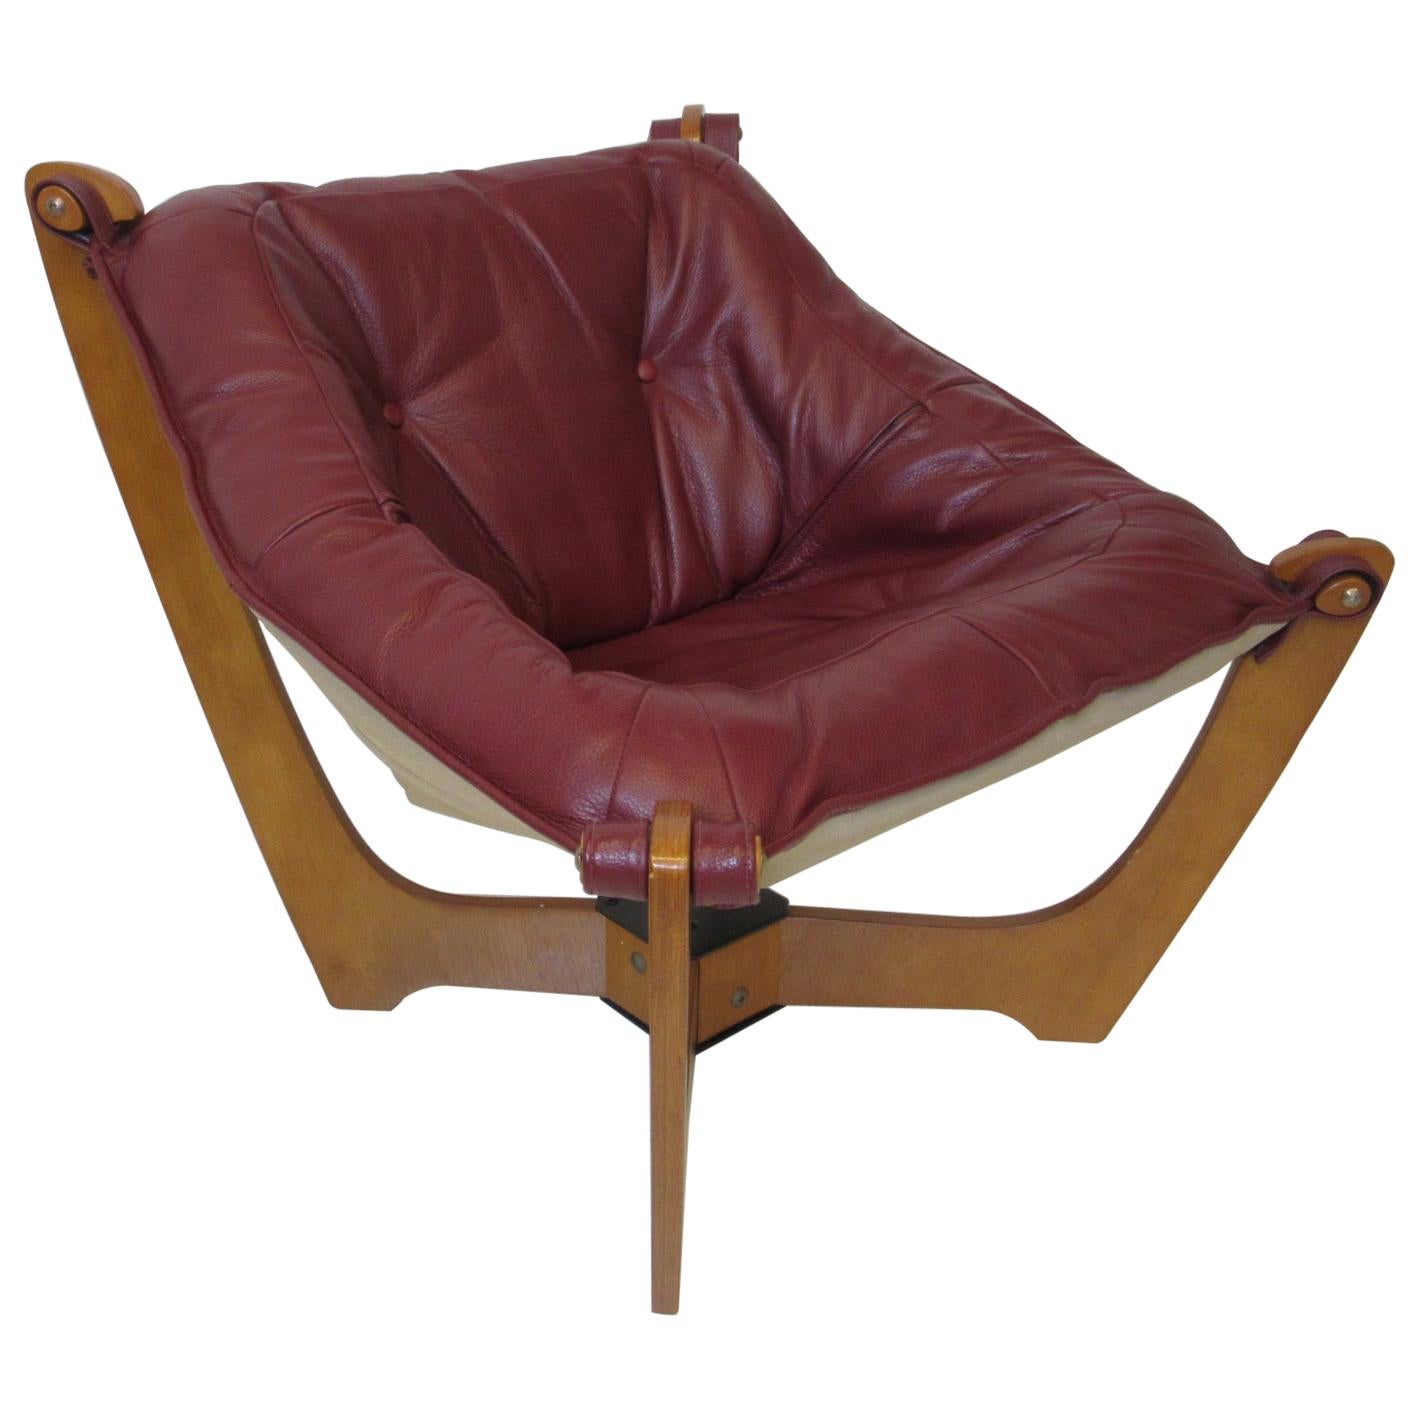 Luna Leather Lounge Chair by Odd Knutsen Norway